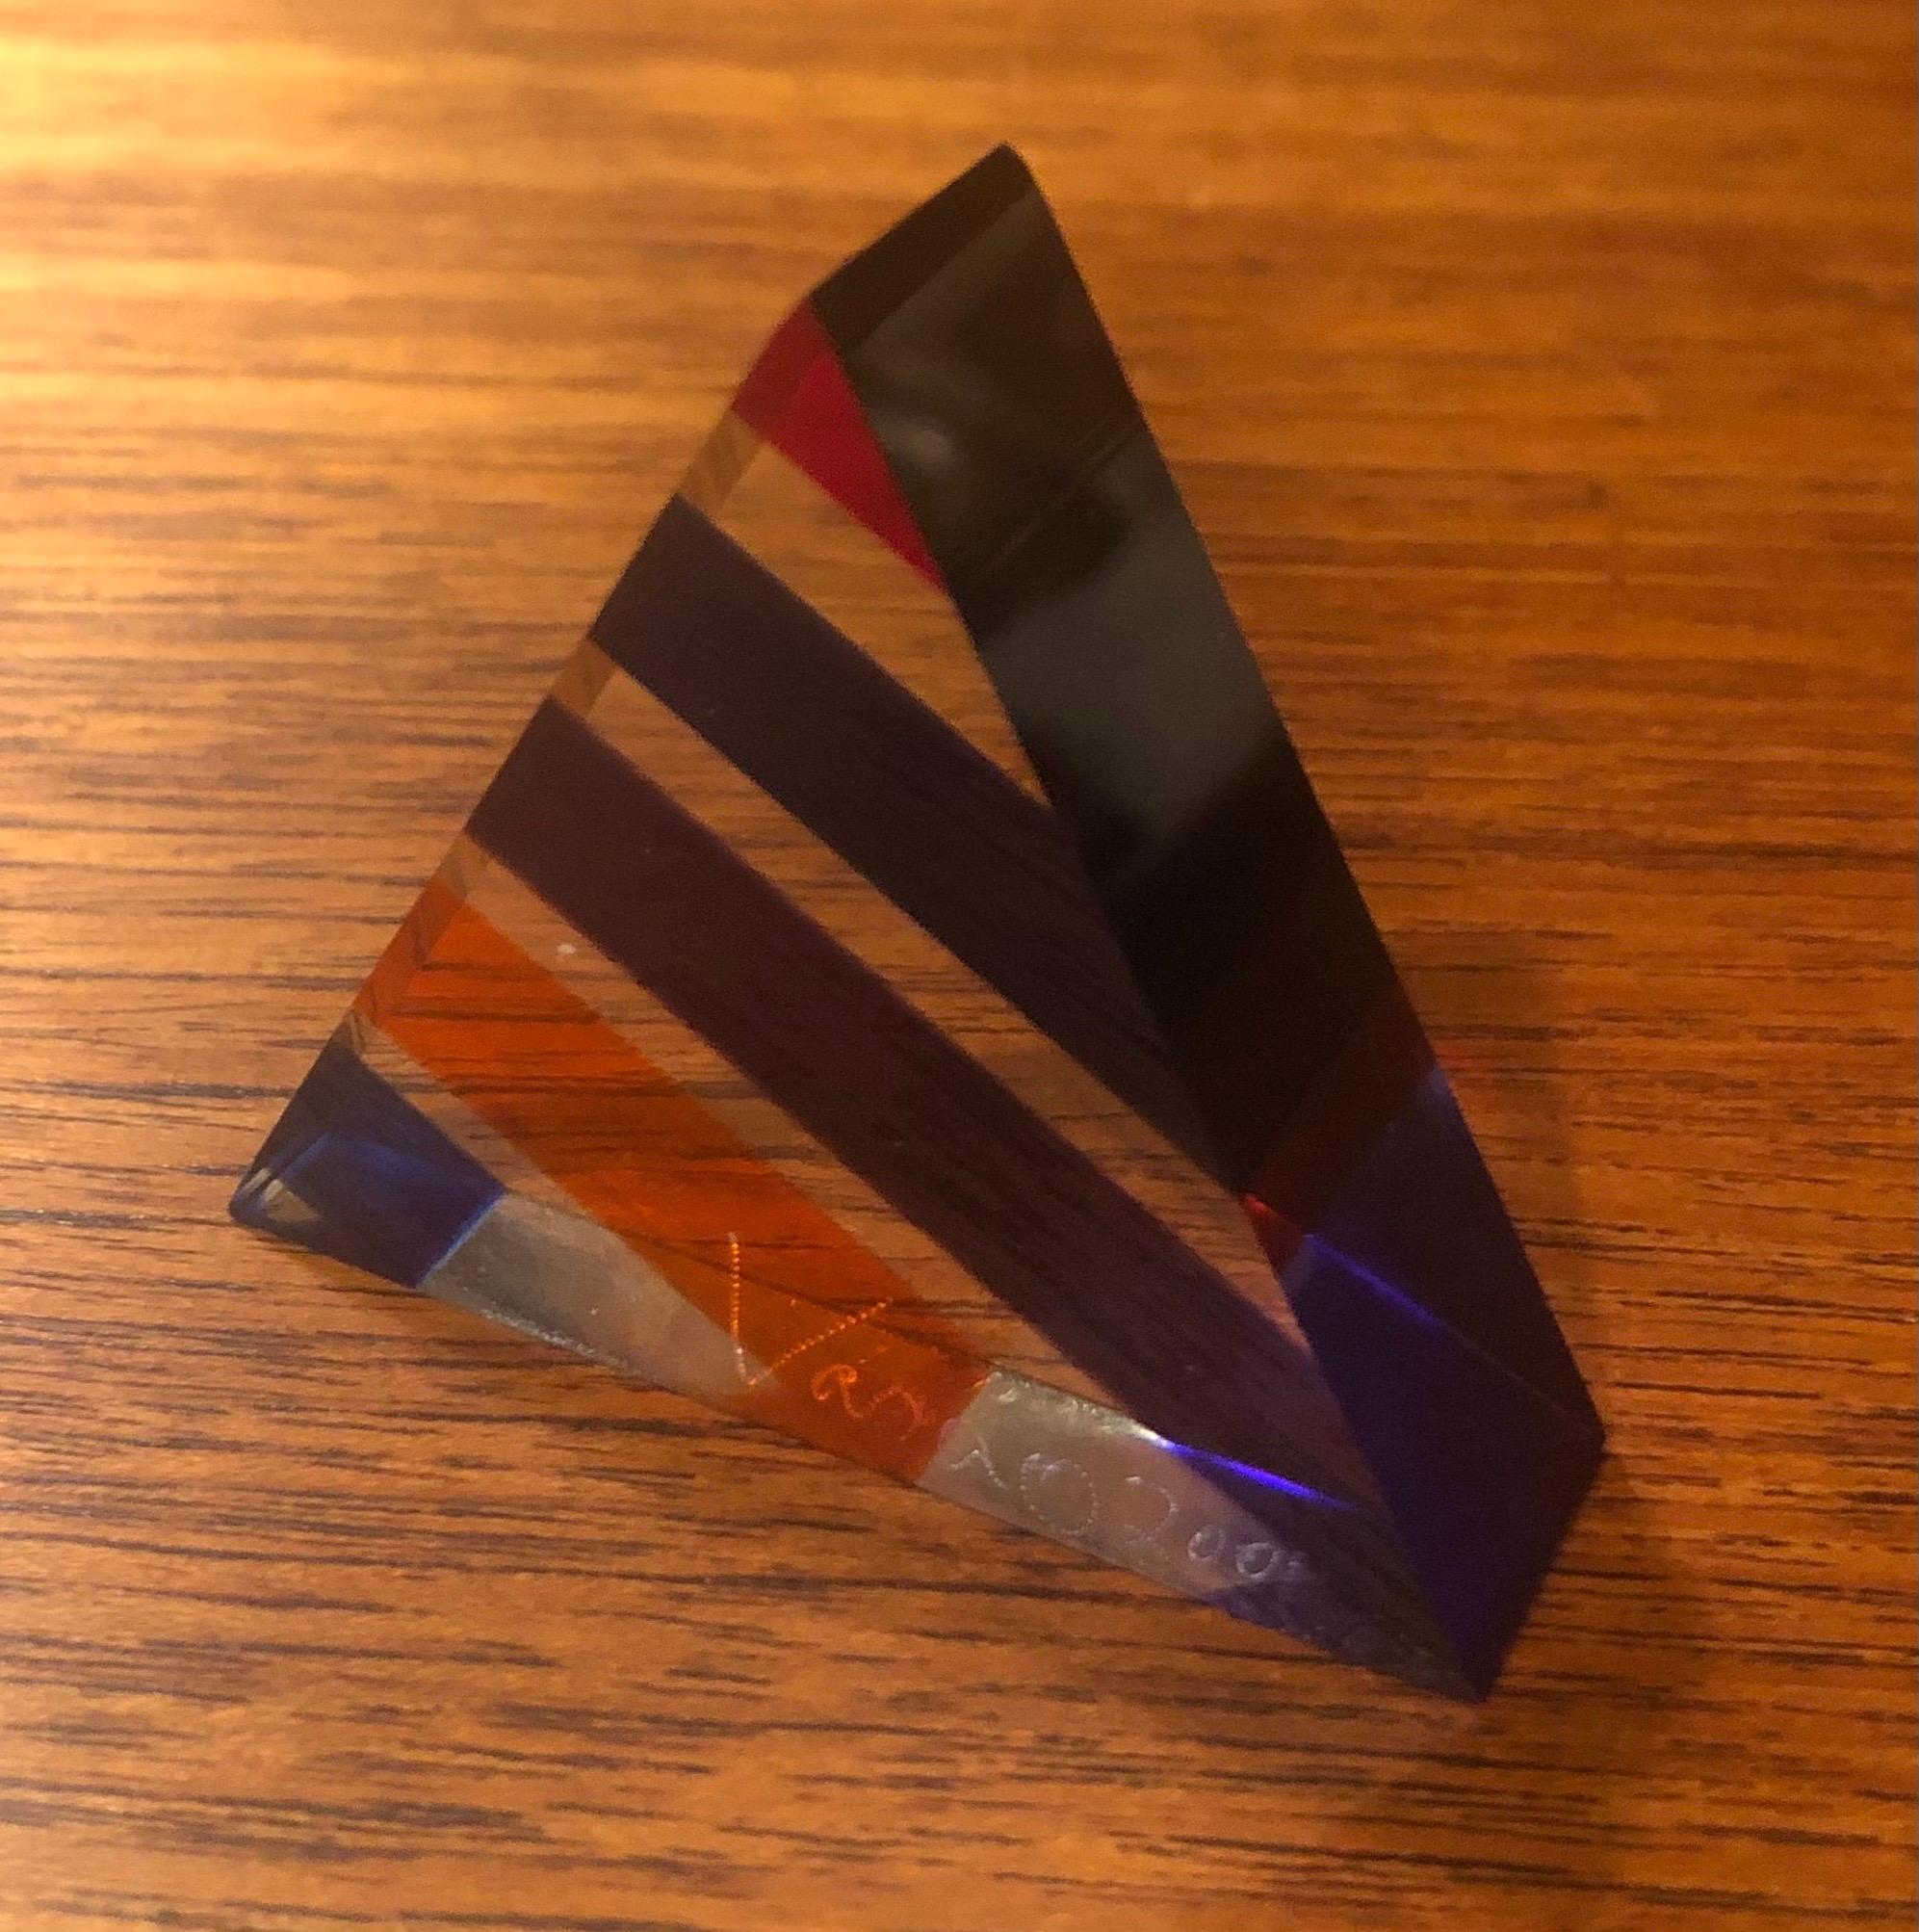 Op Art Acrylic Triangle Pyramid Sculpture / Paperweight by Vasa Mihich 2